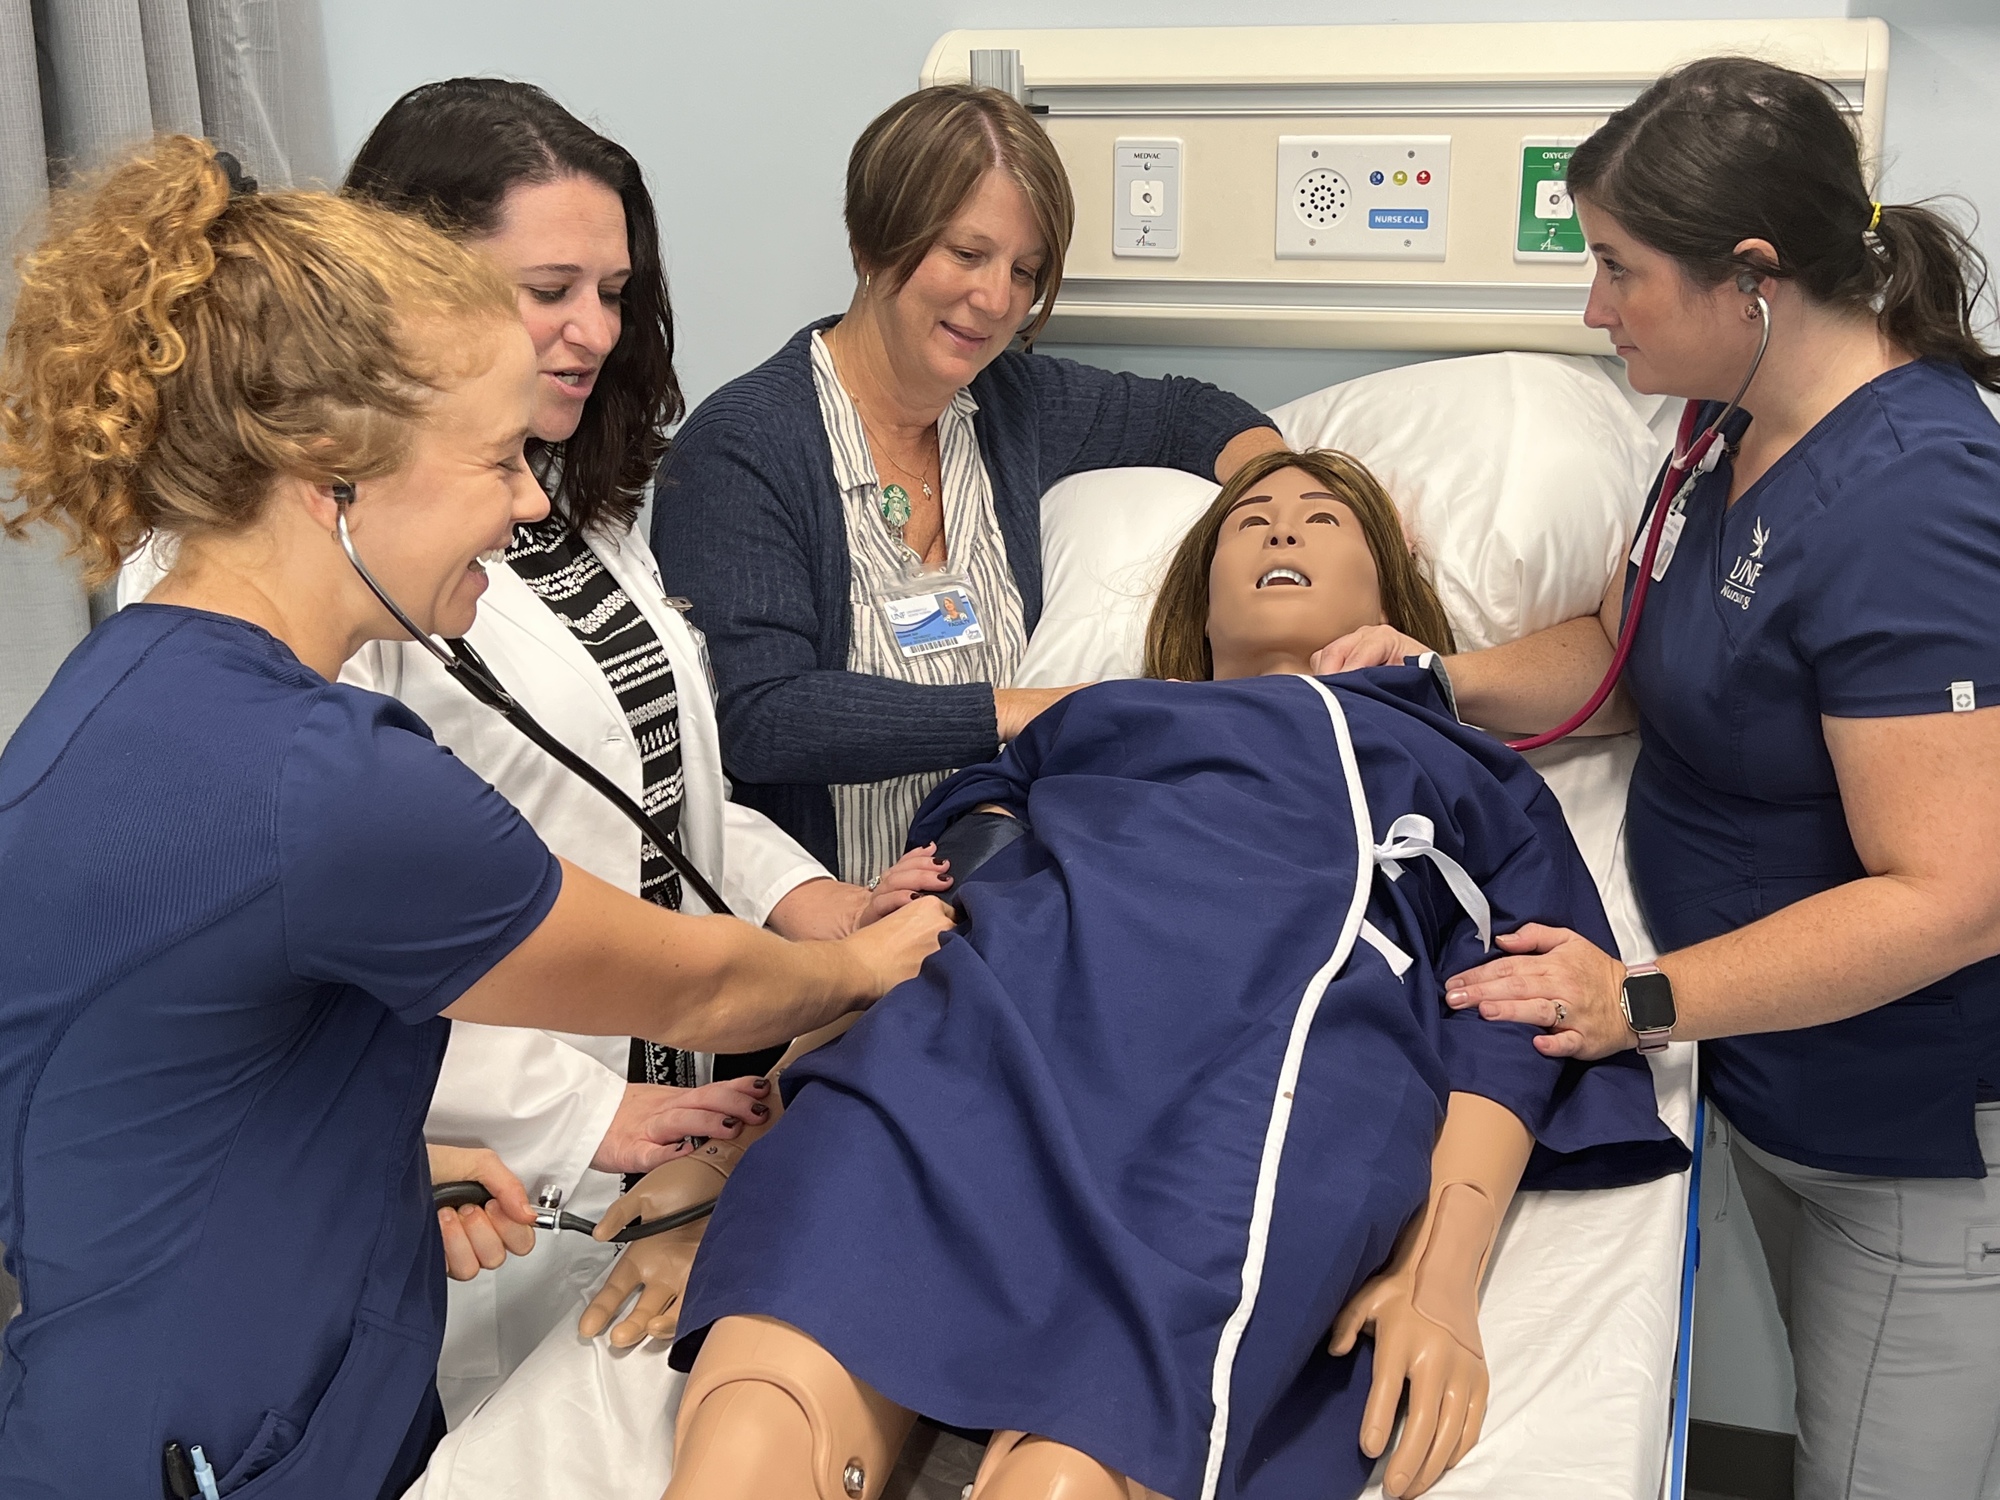 Instructor Marguerite Richards, a registered nurse, demonstrates taking the “pulse” of the robot patient in the HCA Healthcare Center for Clinical Advancement at the University of North Florida.